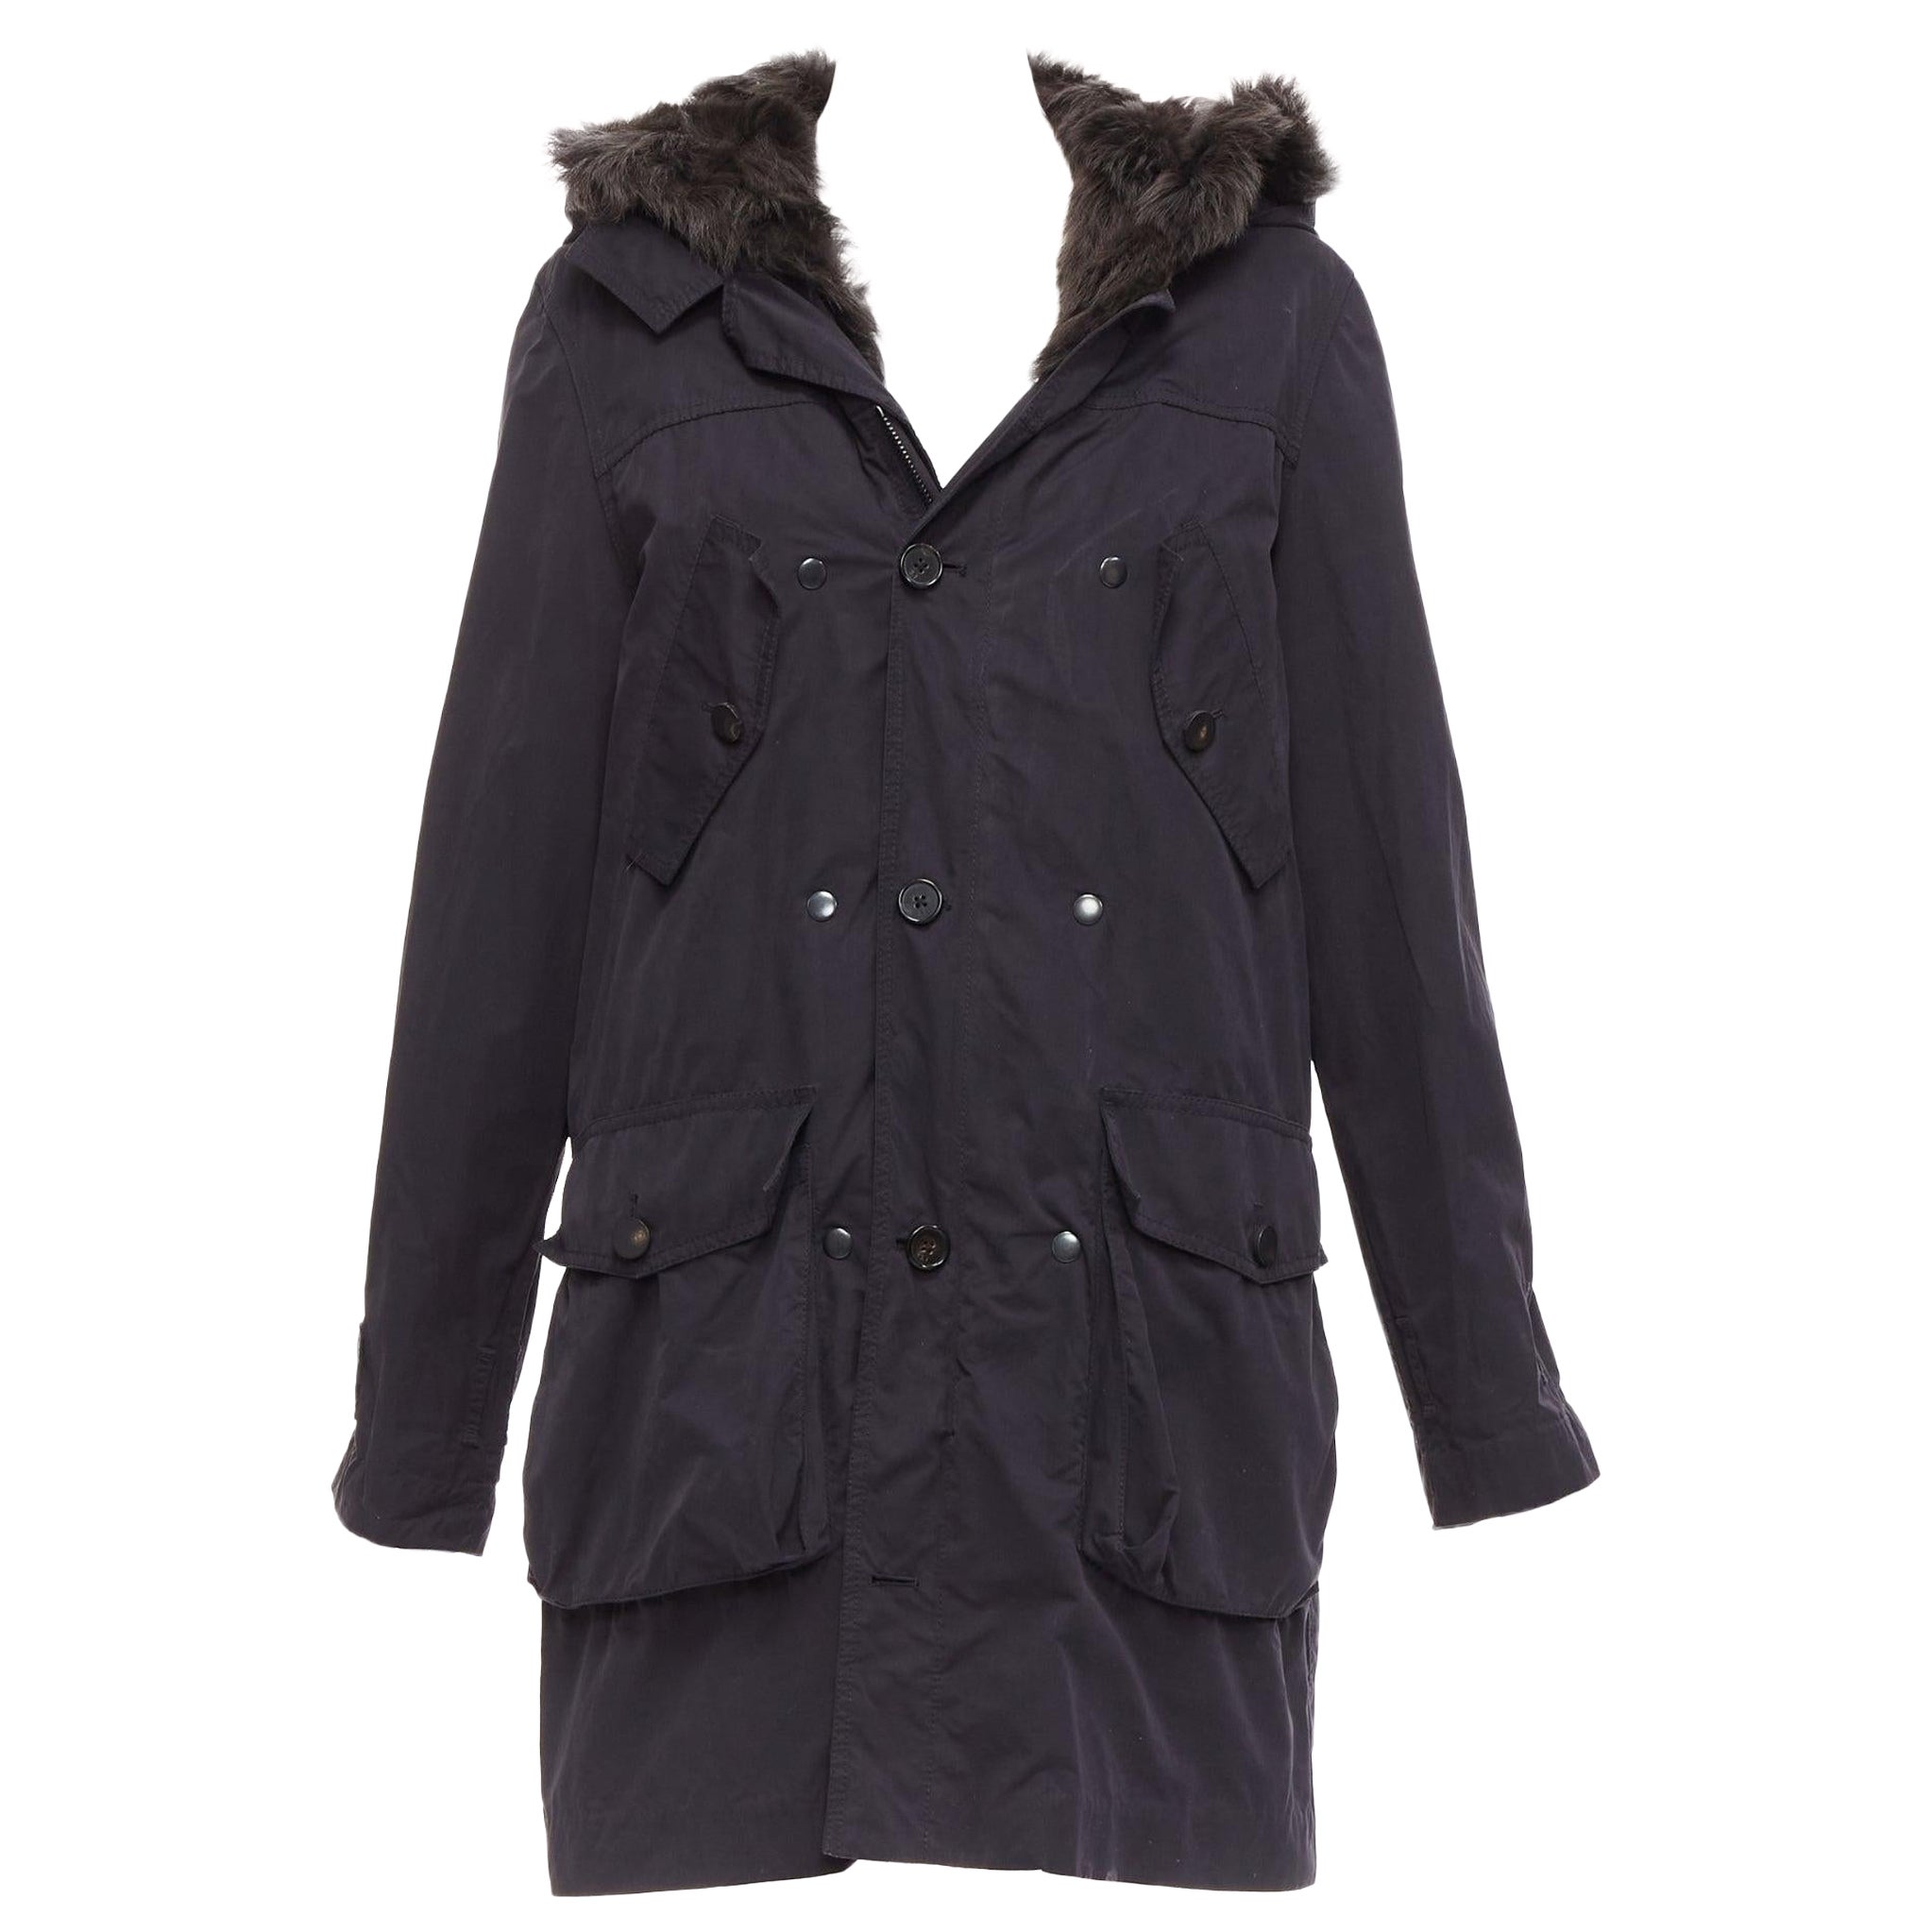 3.1 Phillip Lim Coats and Outerwear